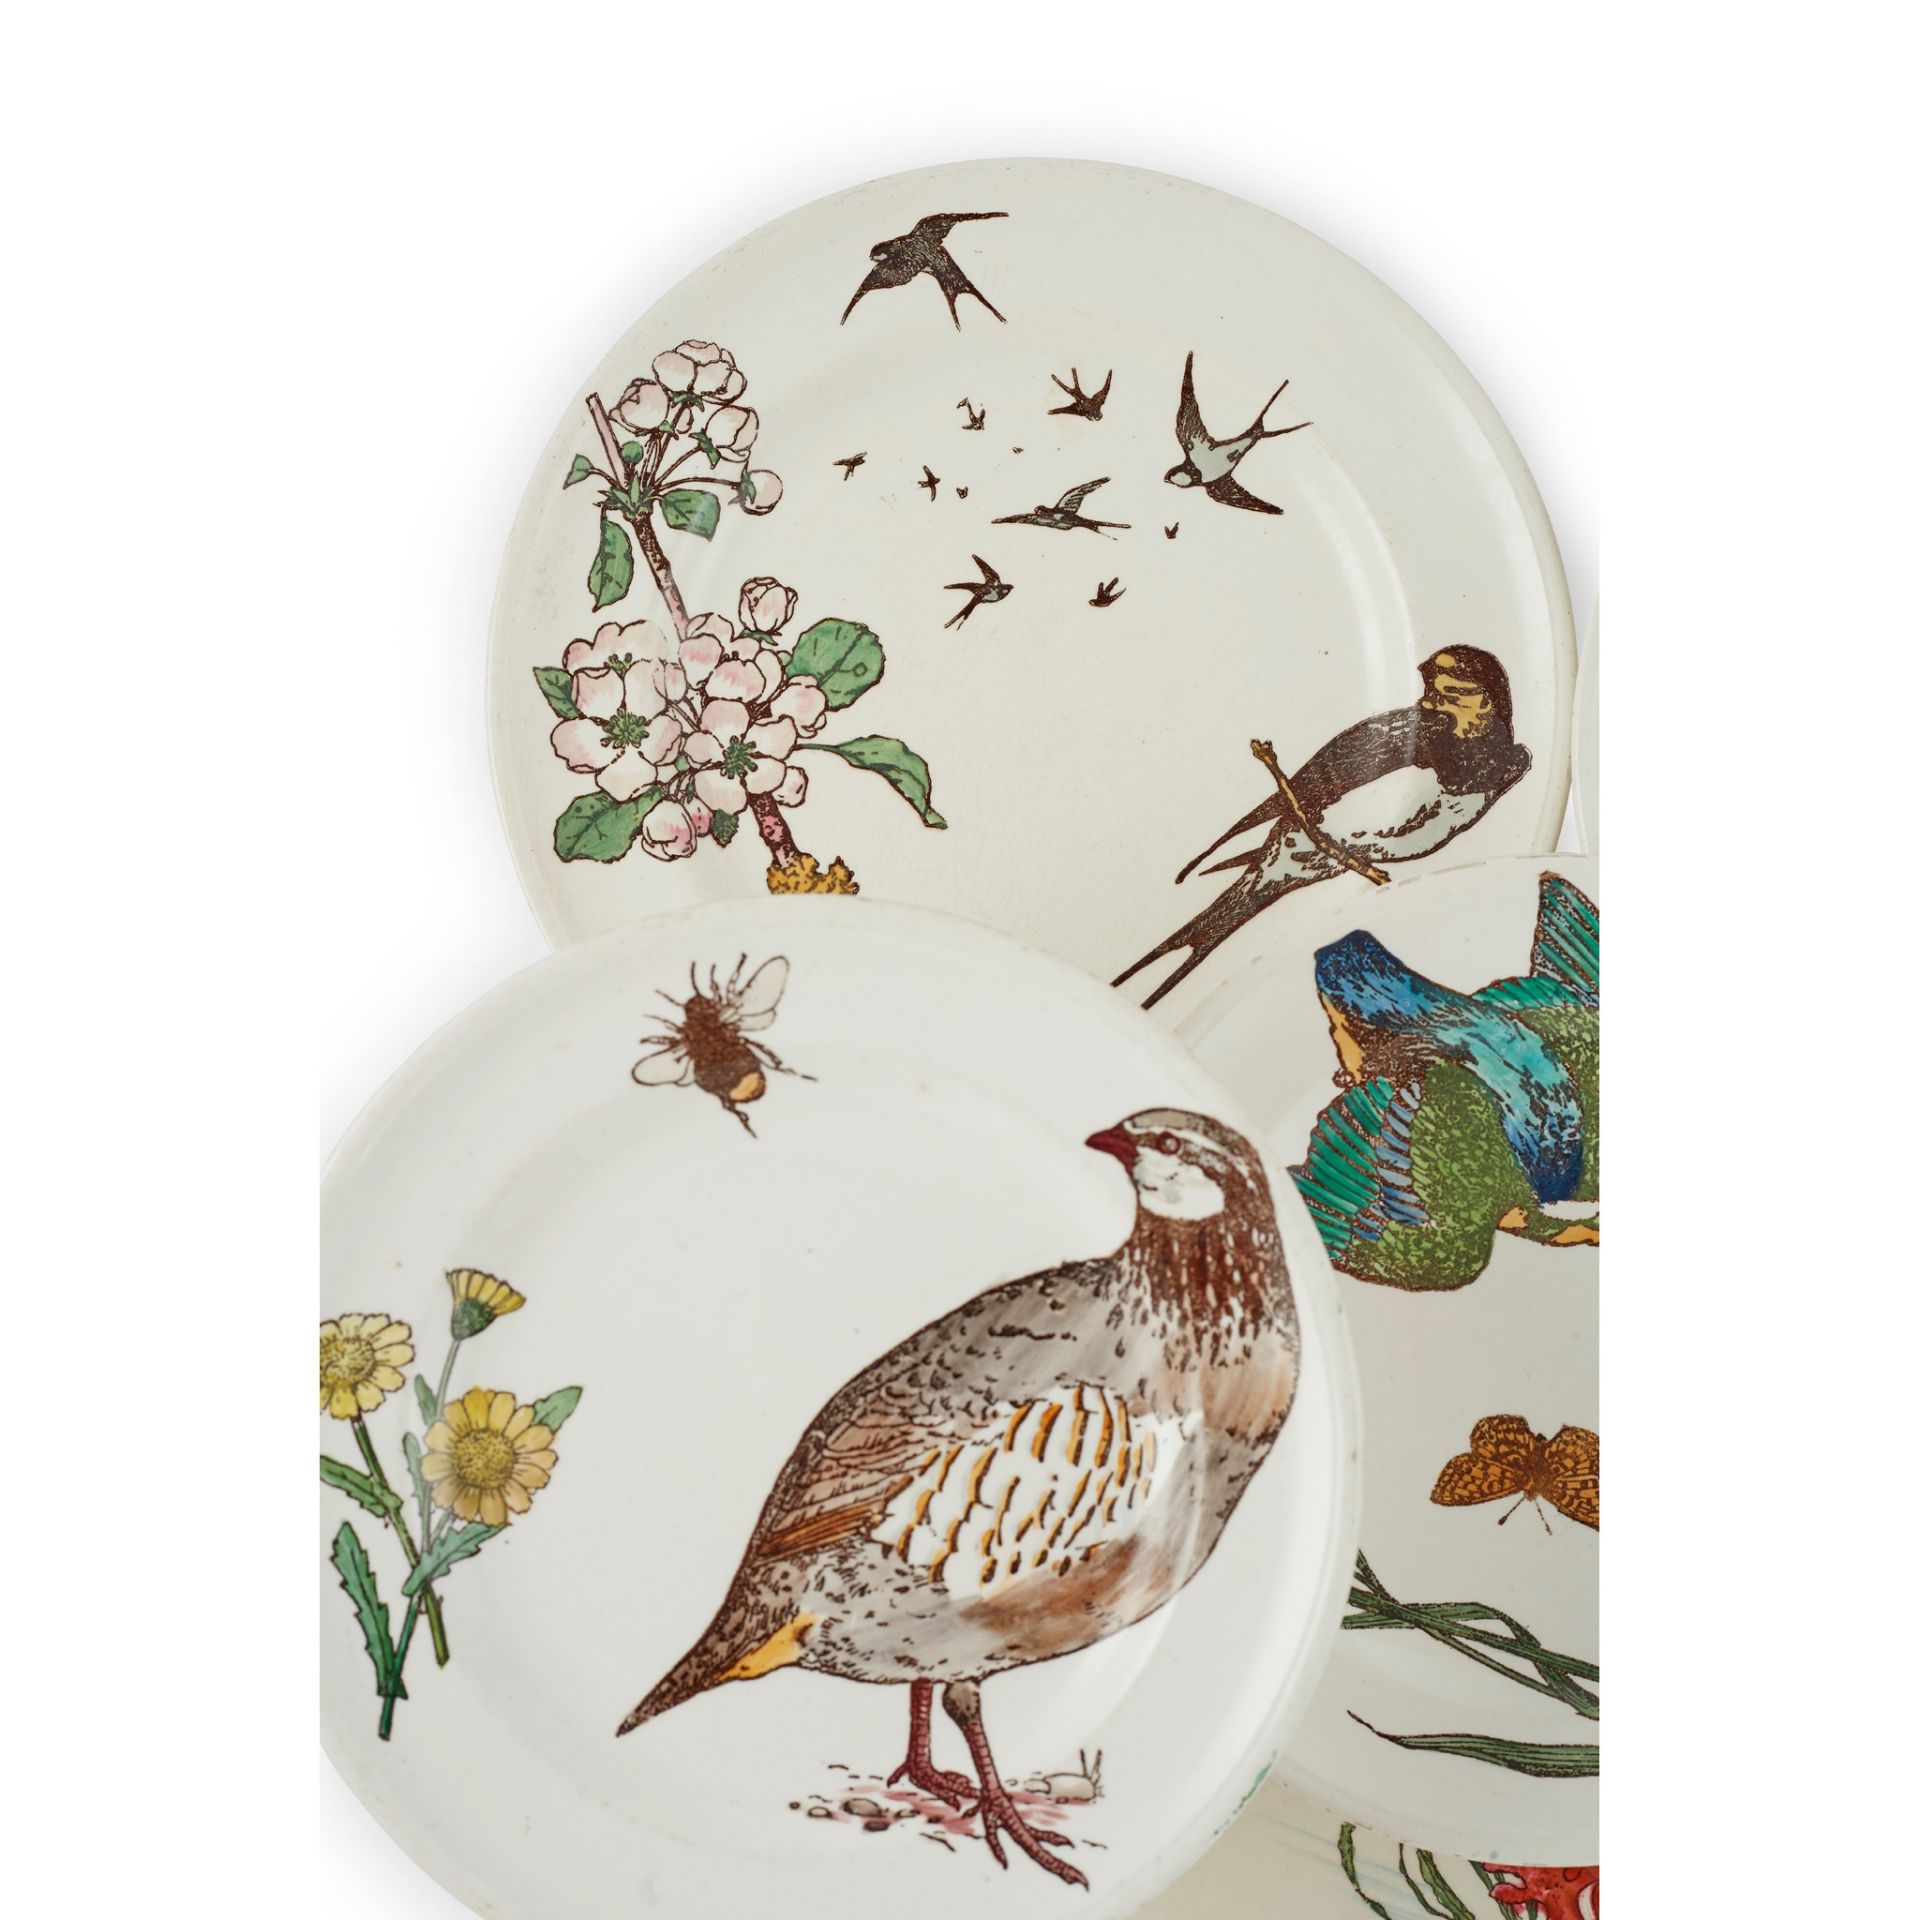 WILLIAM STEPHEN COLEMAN (1829-1904) FOR MINTON & CO. SET OF TEN ‘NATURALIST SERIES’ PLATES, CIRCA - Image 5 of 7